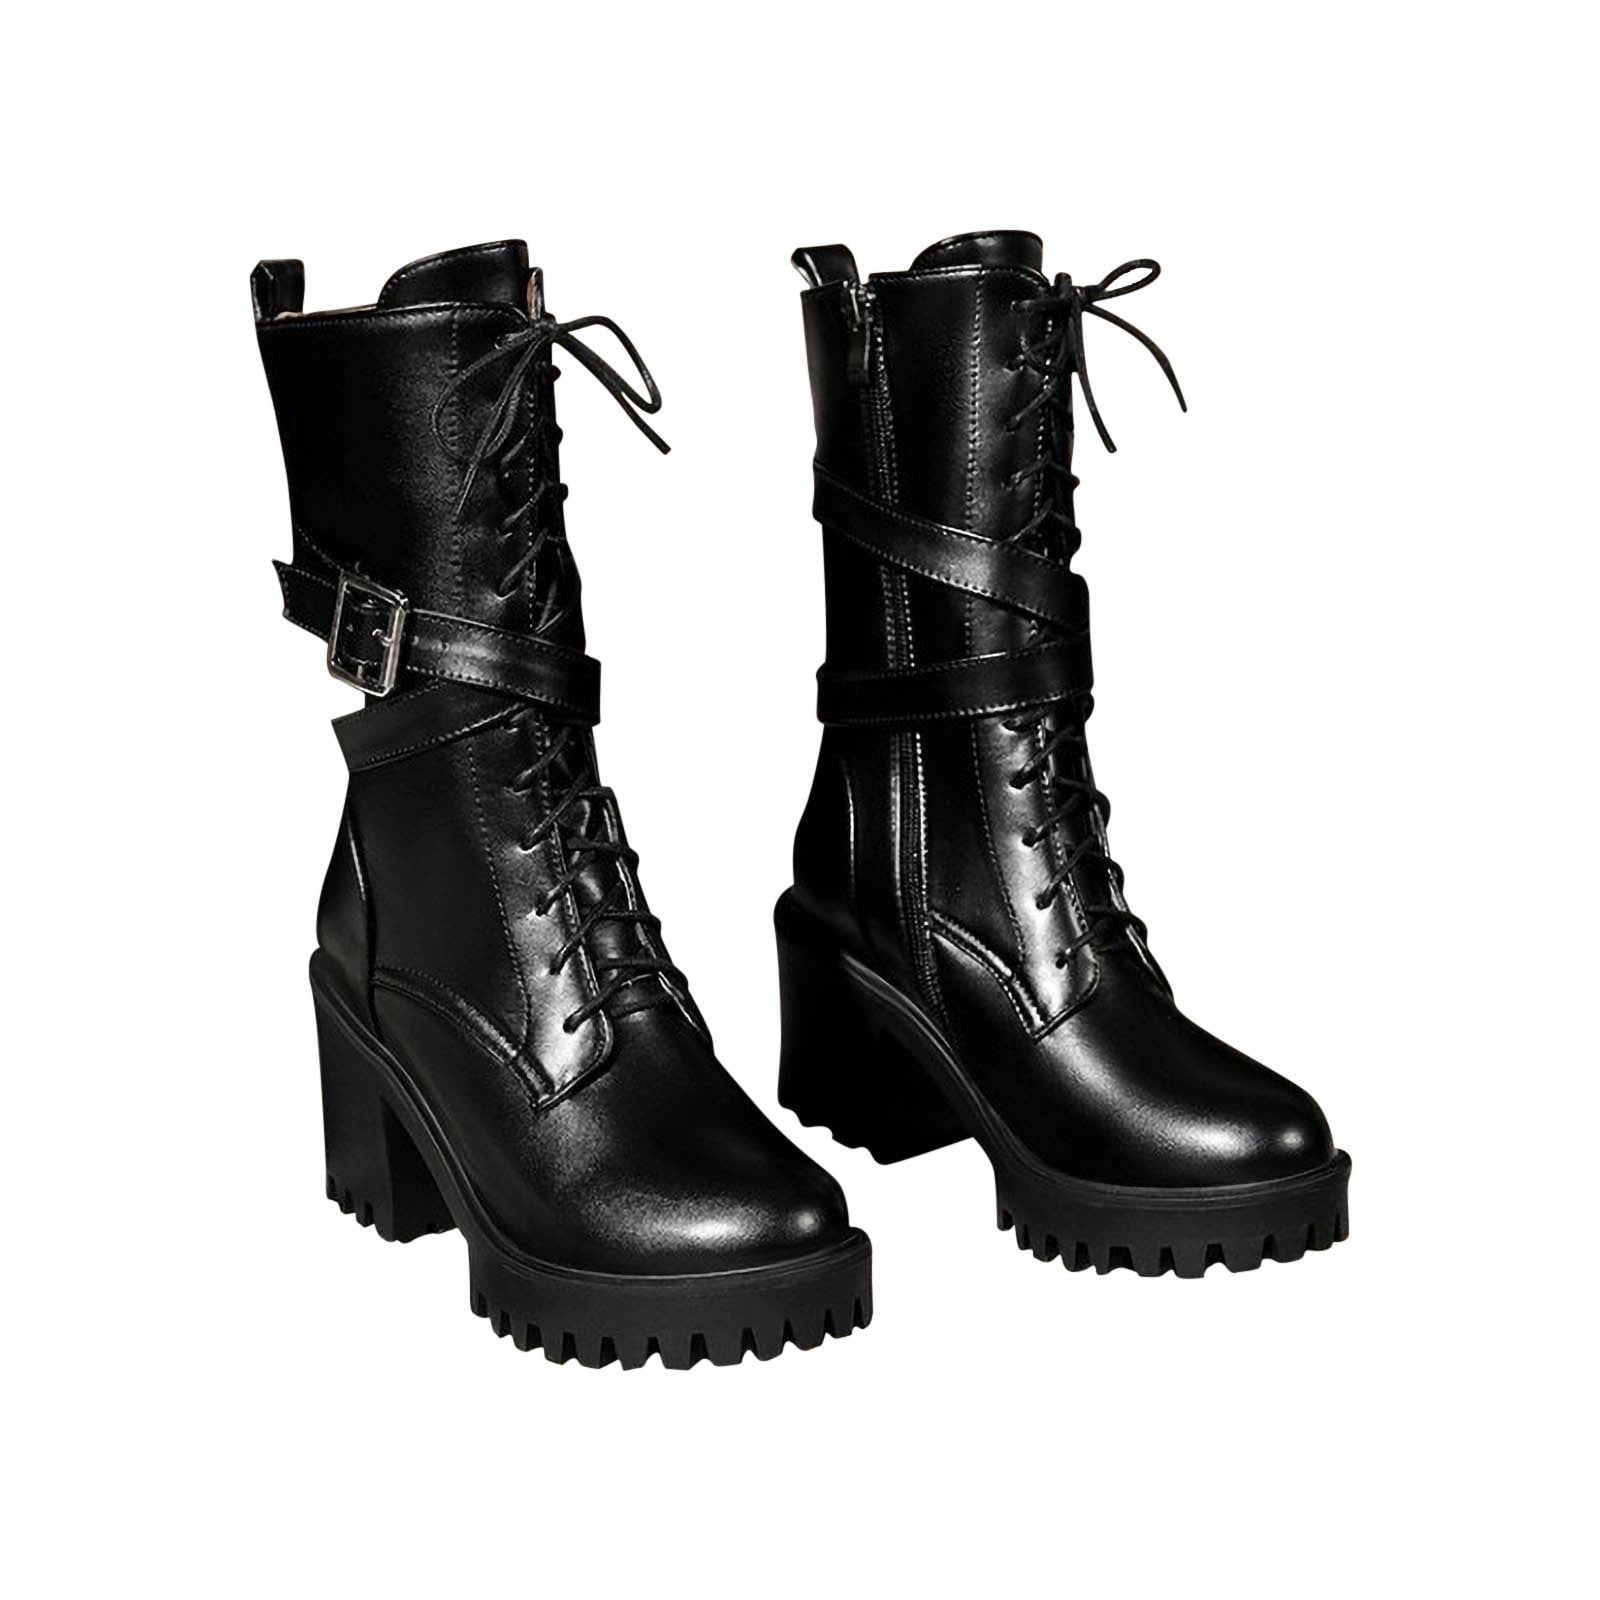 6 Ways to Style Combat Boots - LIFE WITH JAZZ | Casual winter outfits,  Black combat boots outfit, Combat boots outfit fall